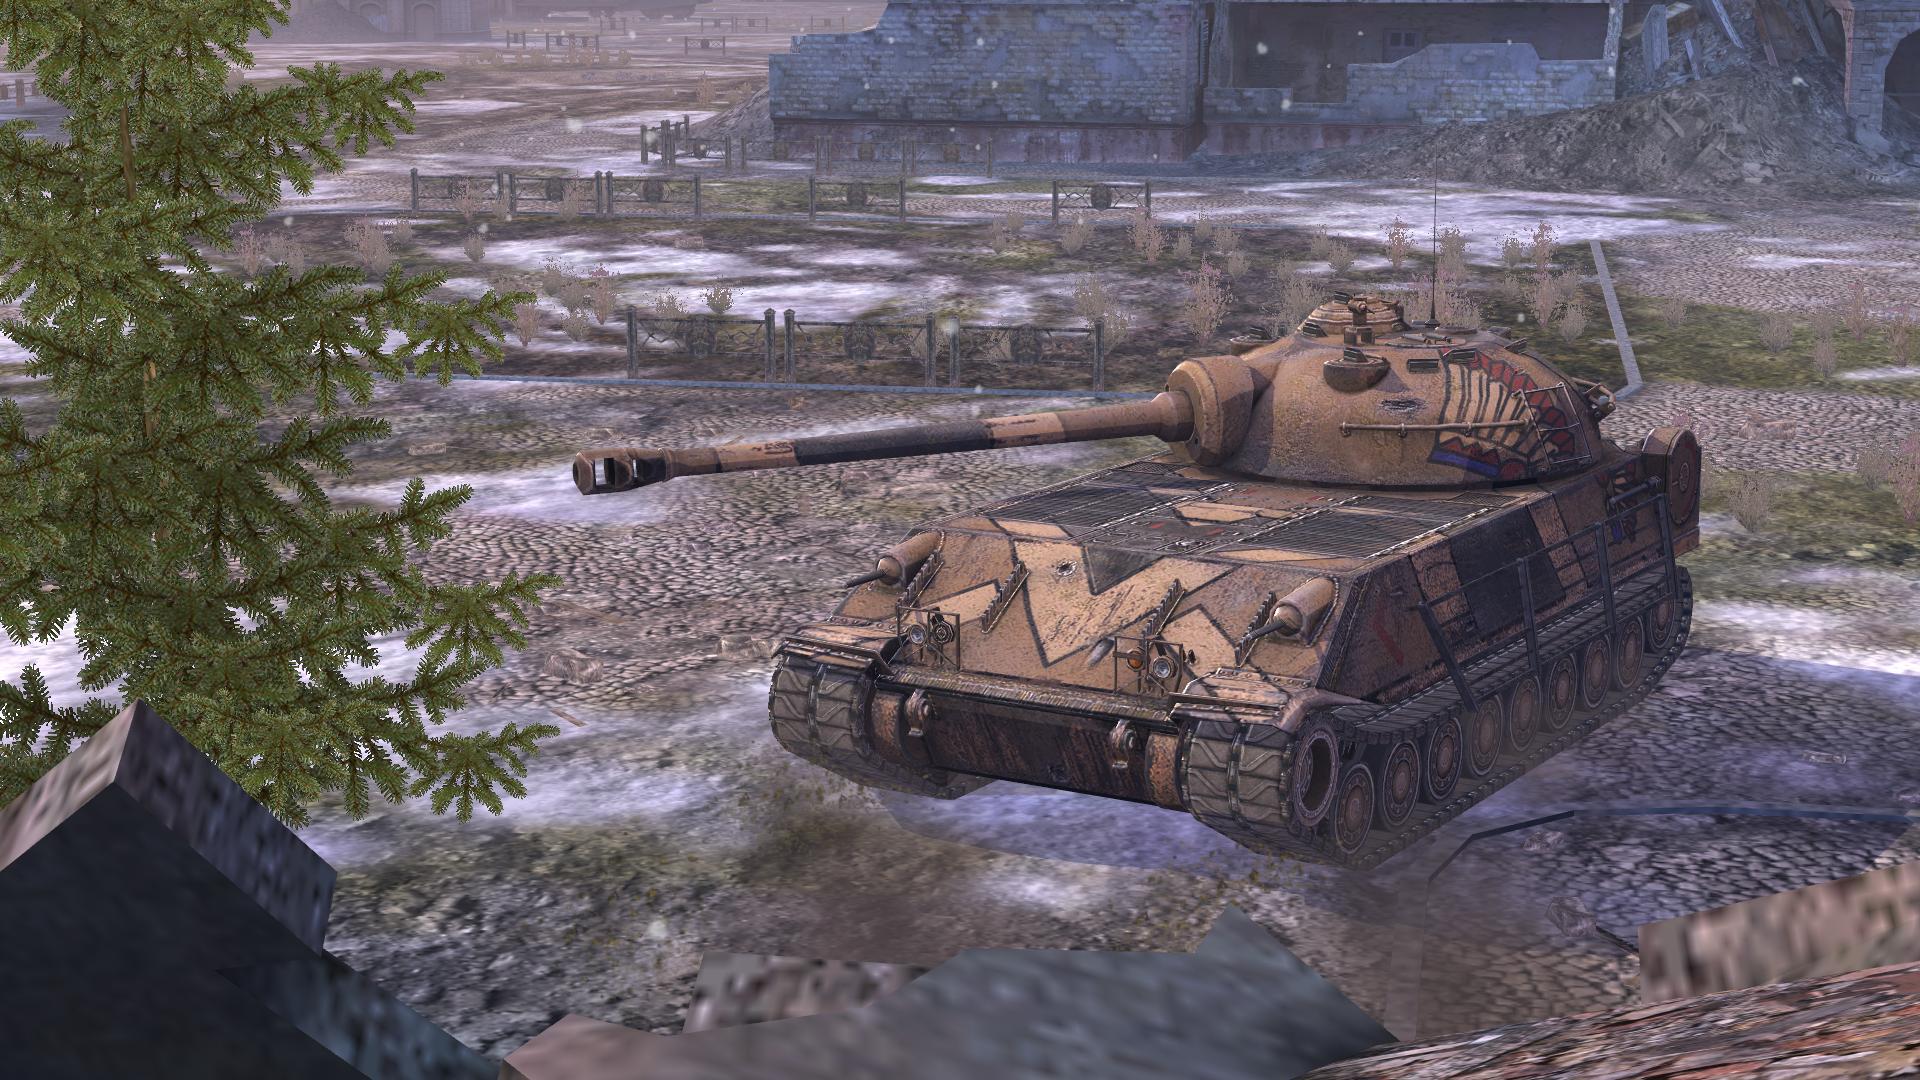 Mar 6 19 It S Trophy Hunt Time World Of Tanks Blitz Tog Ii After A Dozen Confident Victories Enemy Vehicles Finally Retreated So Command Prepared A New Order Get As Many War Trophies As Possible From March 6 To March 14 Complete Missions